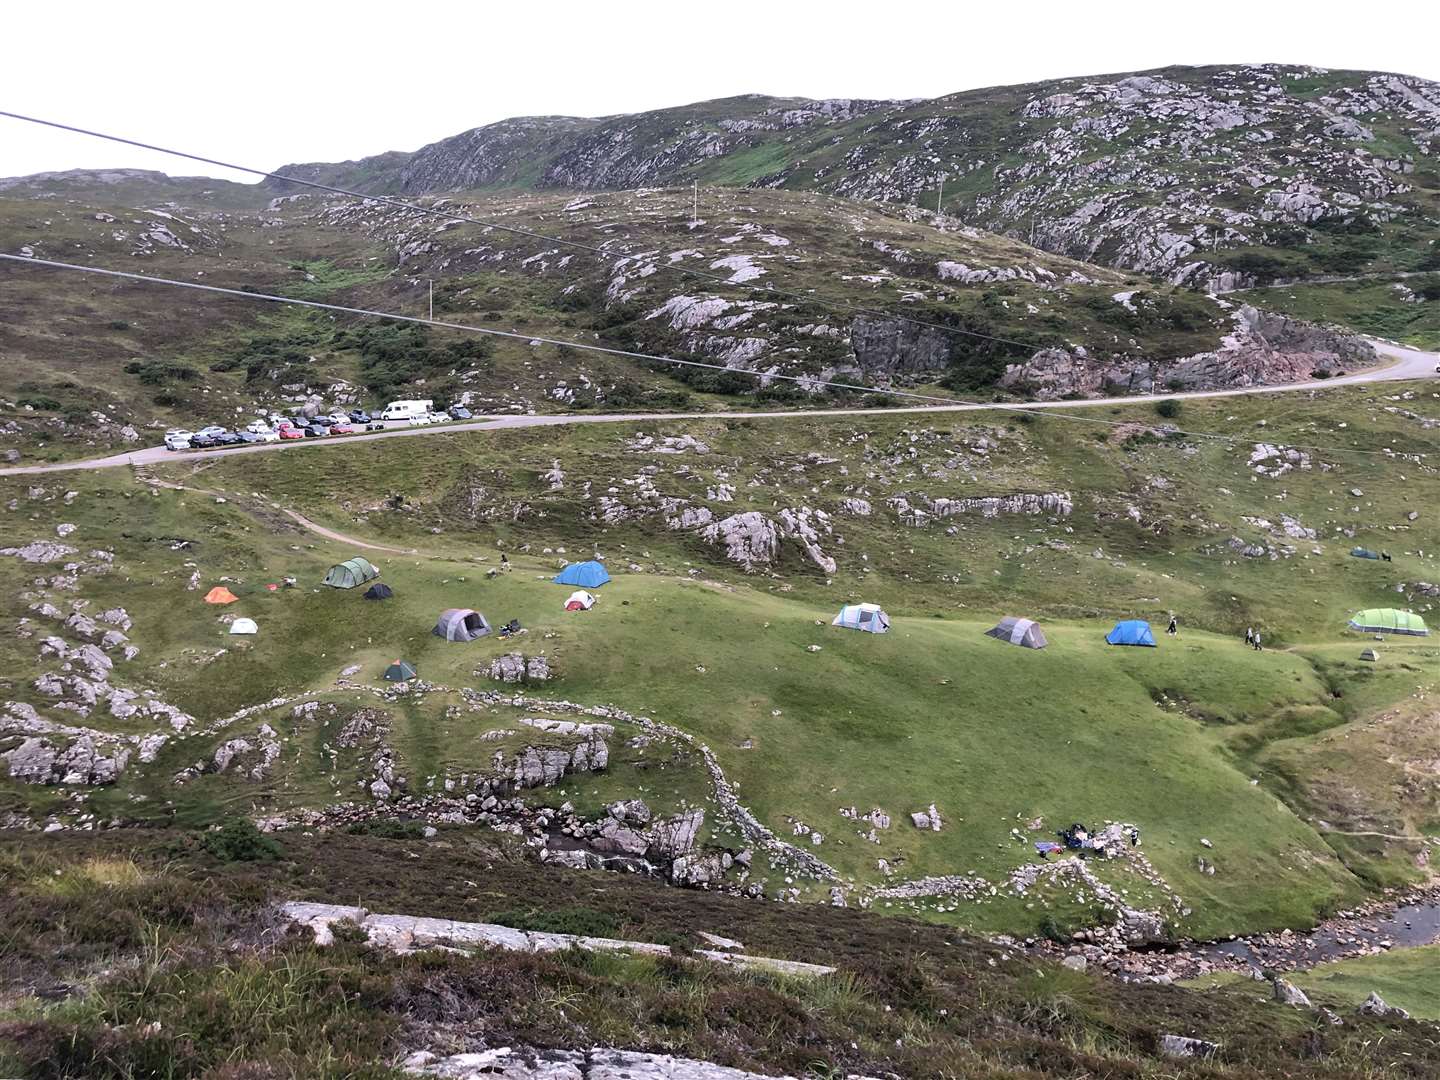 This image showing motorhomes and tents at Ceannabeinne, Durness, gave a sense of the scale of the tourism influx to the far north last summer.